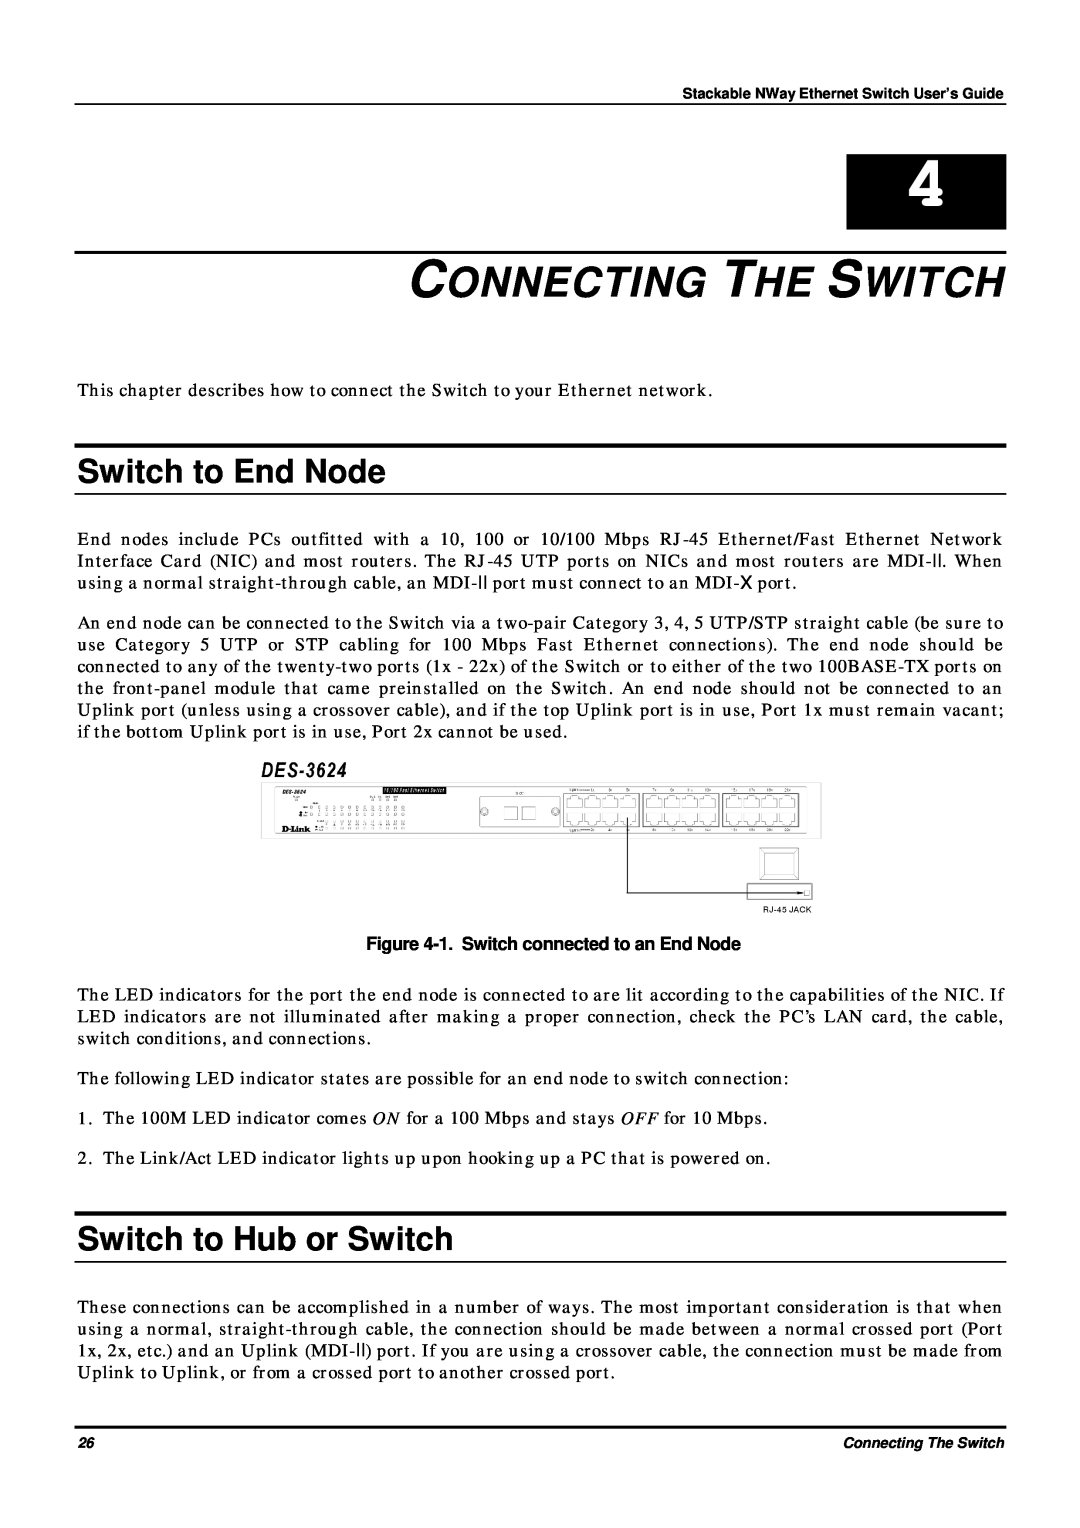 D-Link DES-3624 Connecting The Switch, Switch to End Node, Switch to Hub or Switch, 1. Switch connected to an End Node 